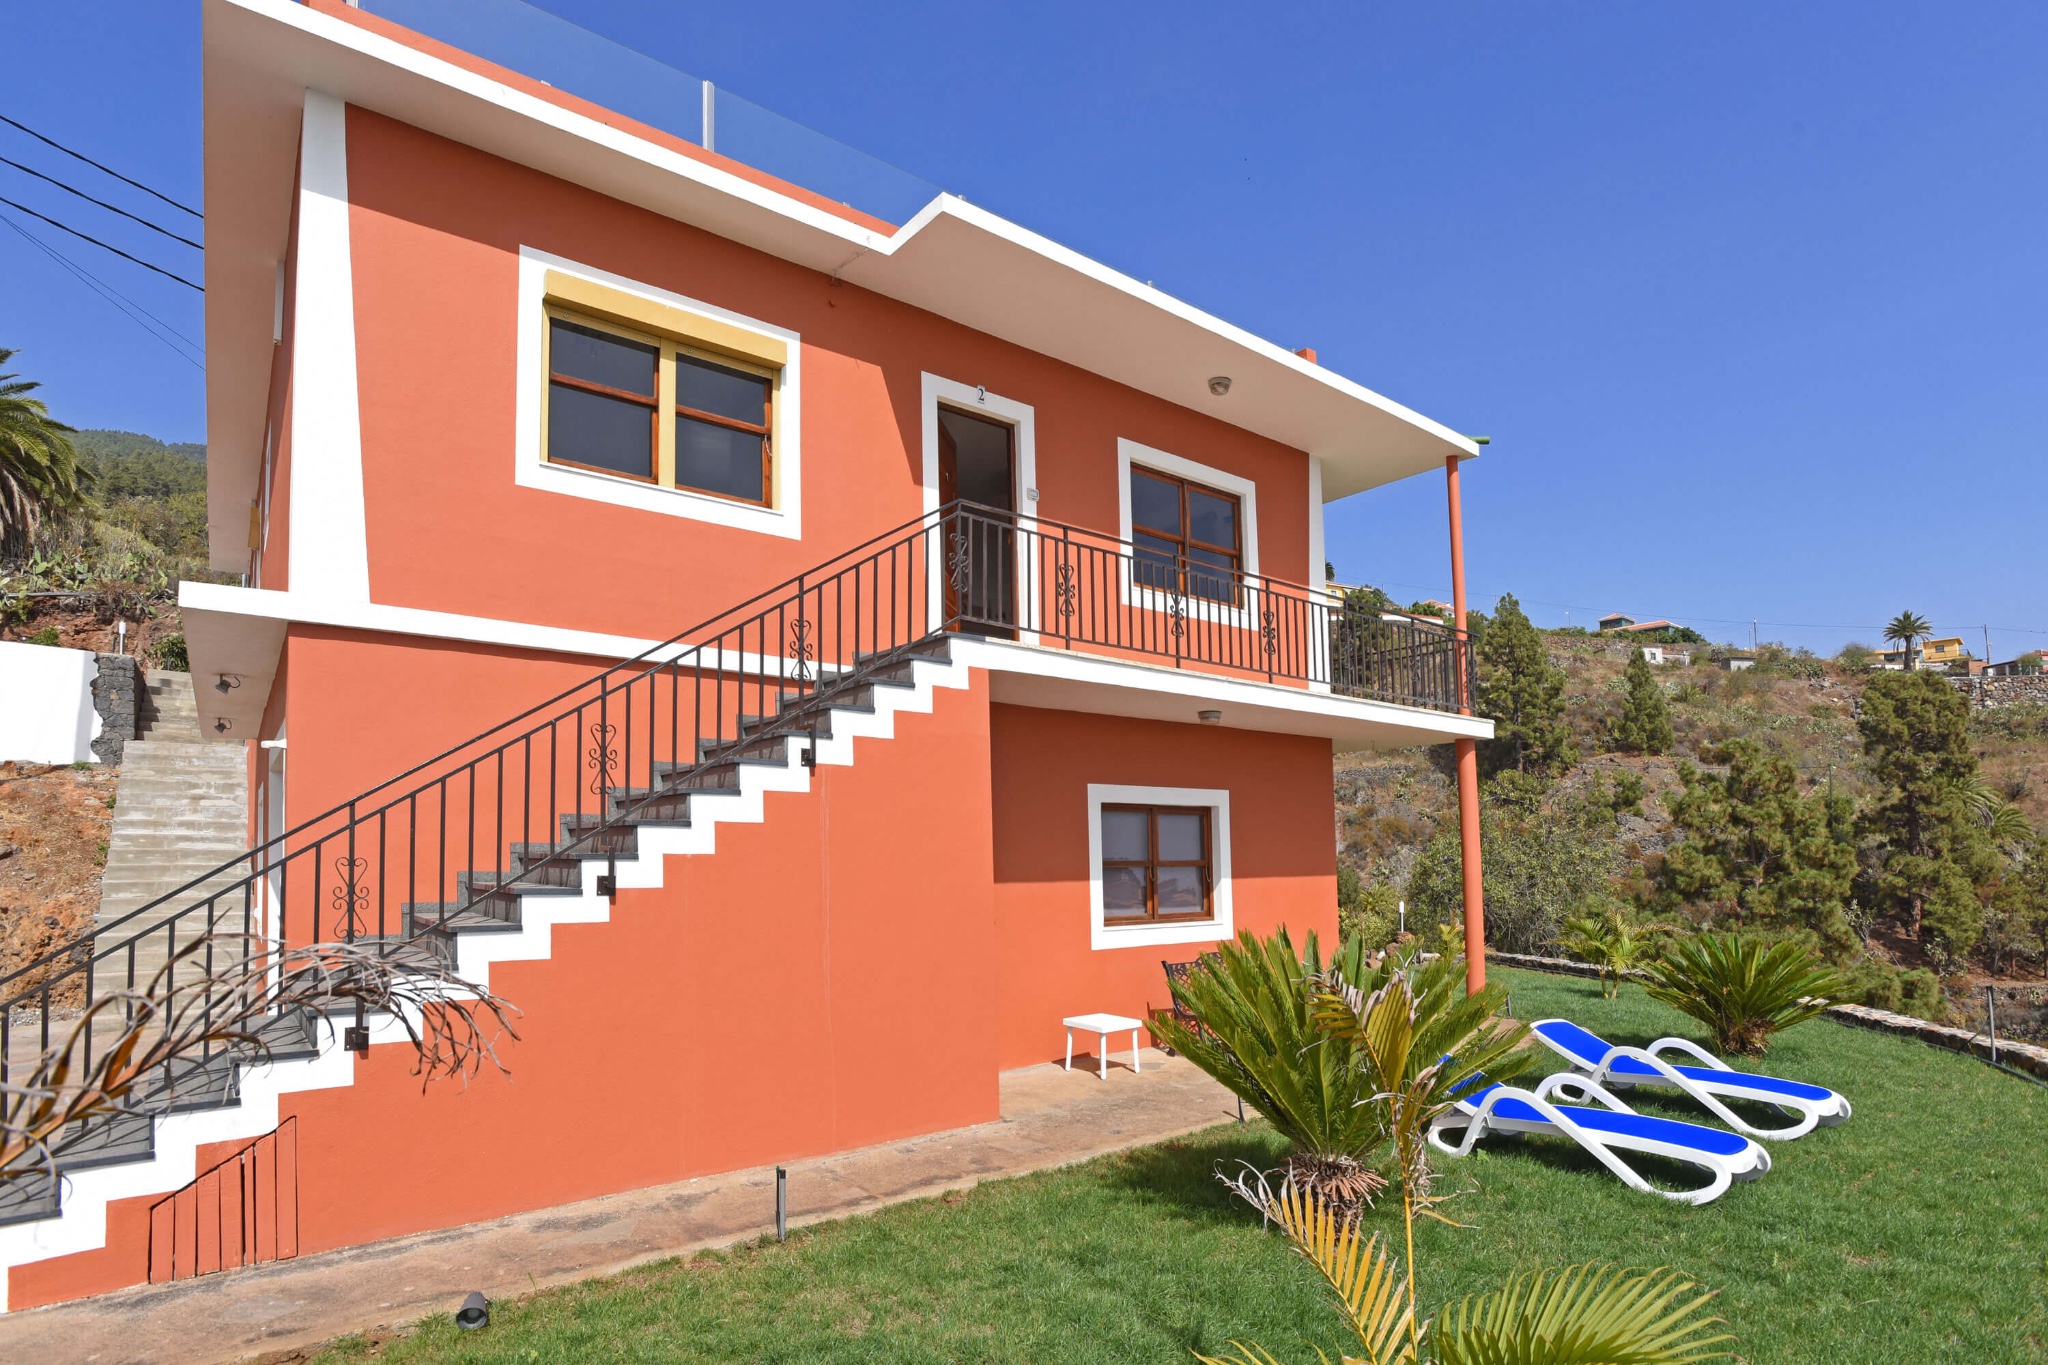 Beautiful three bedroom house with modern interiors and stylish decor, gym and beautiful sea views